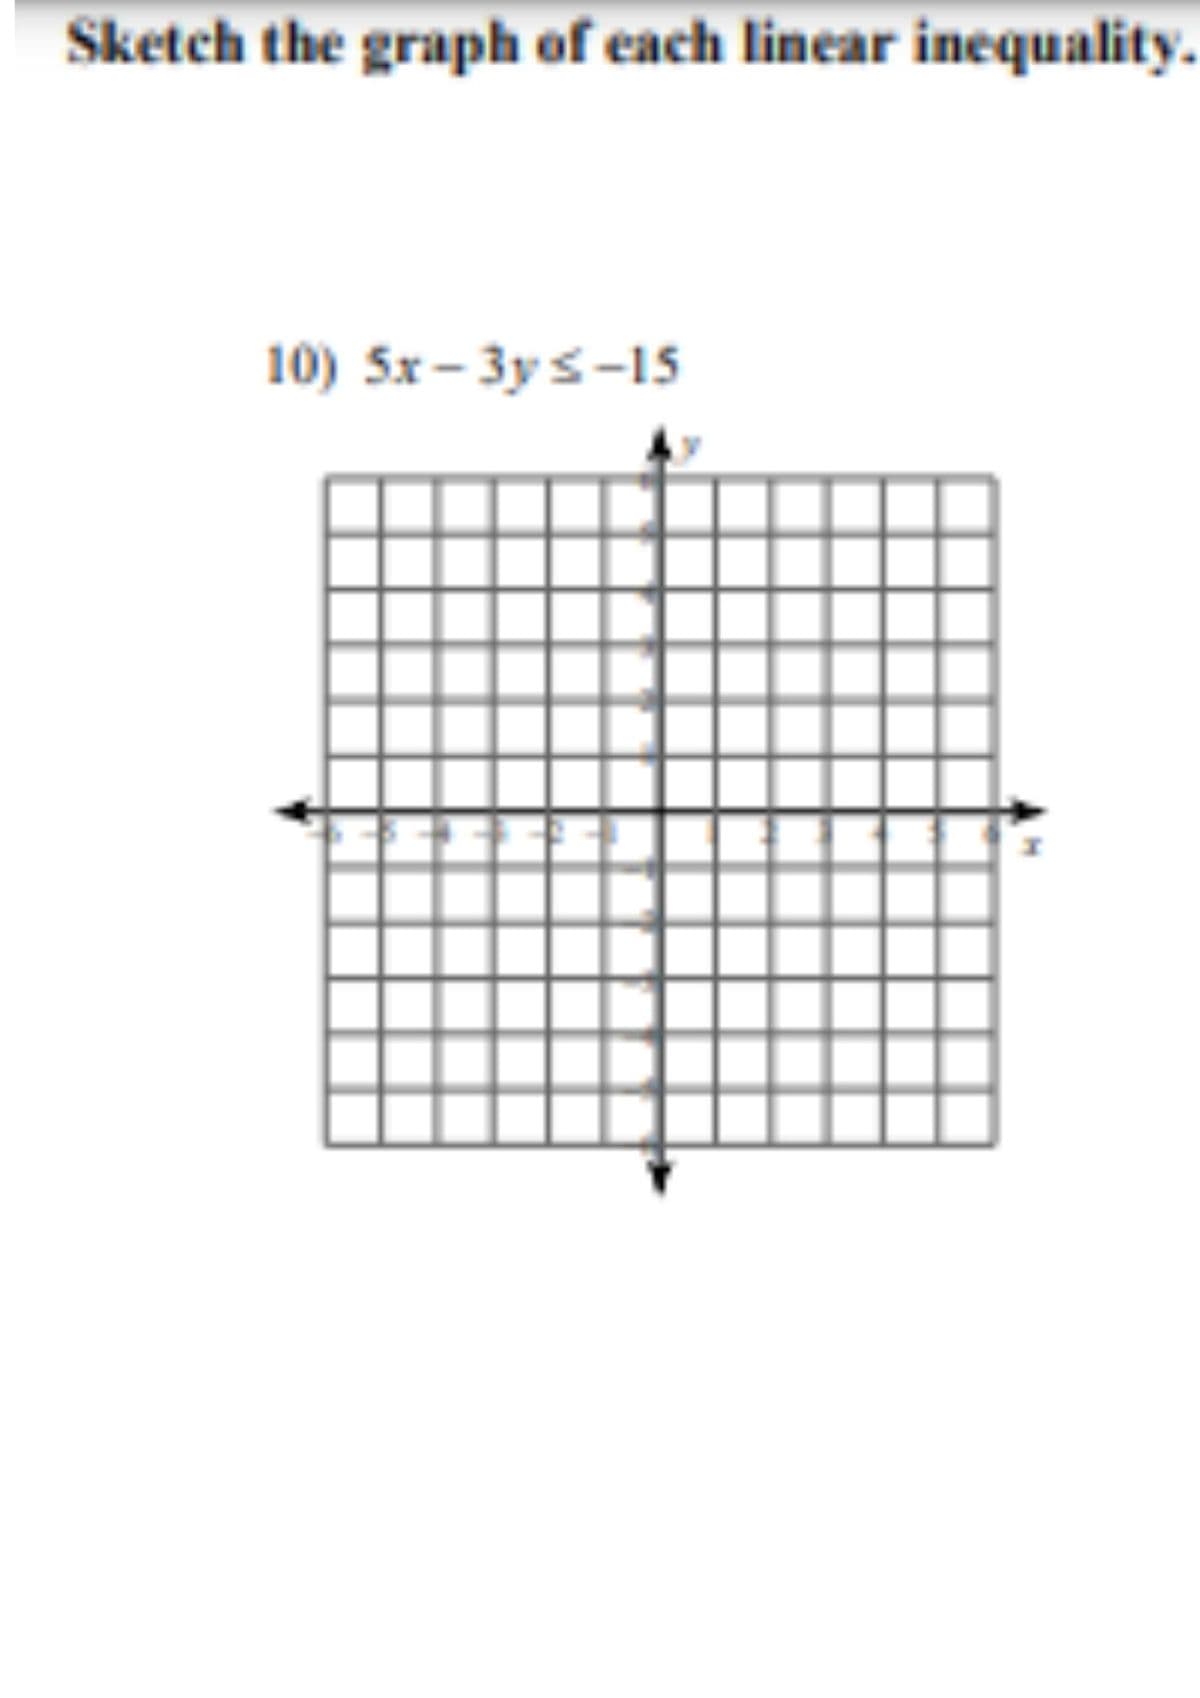 Sketch the graph of each linear inequality.
10) 5x - 3y s-15
